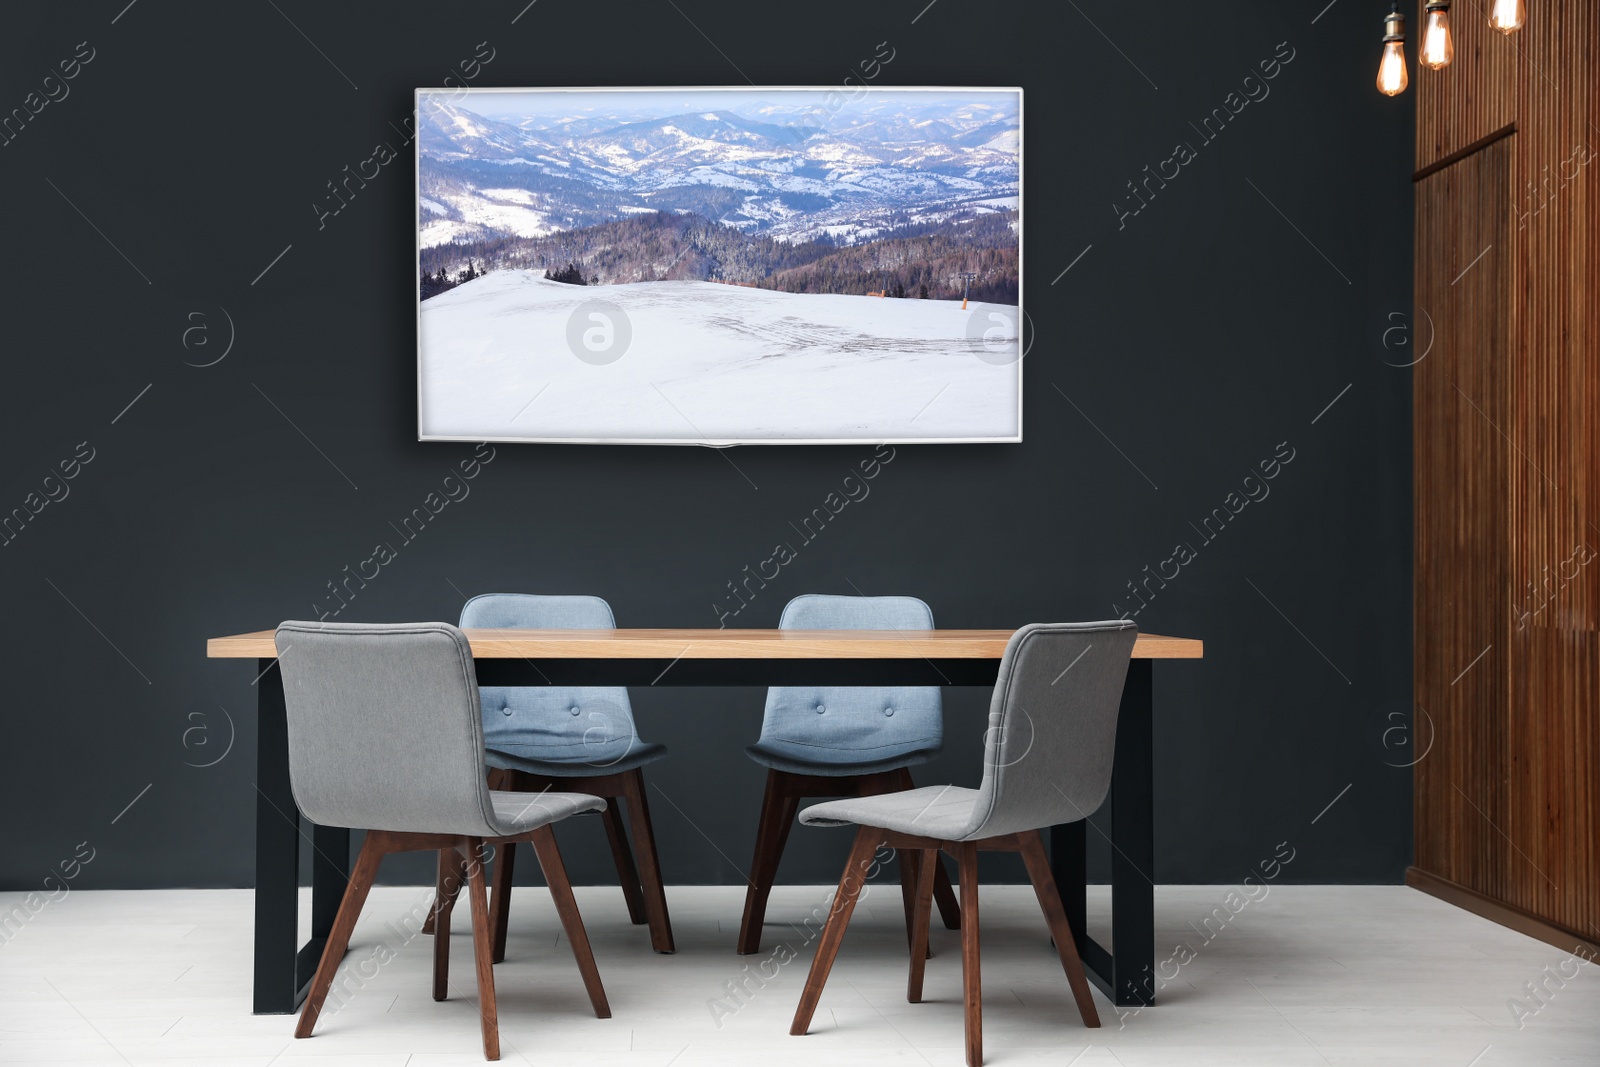 Image of Modern wide screen TV on black wall in room with stylish furniture 